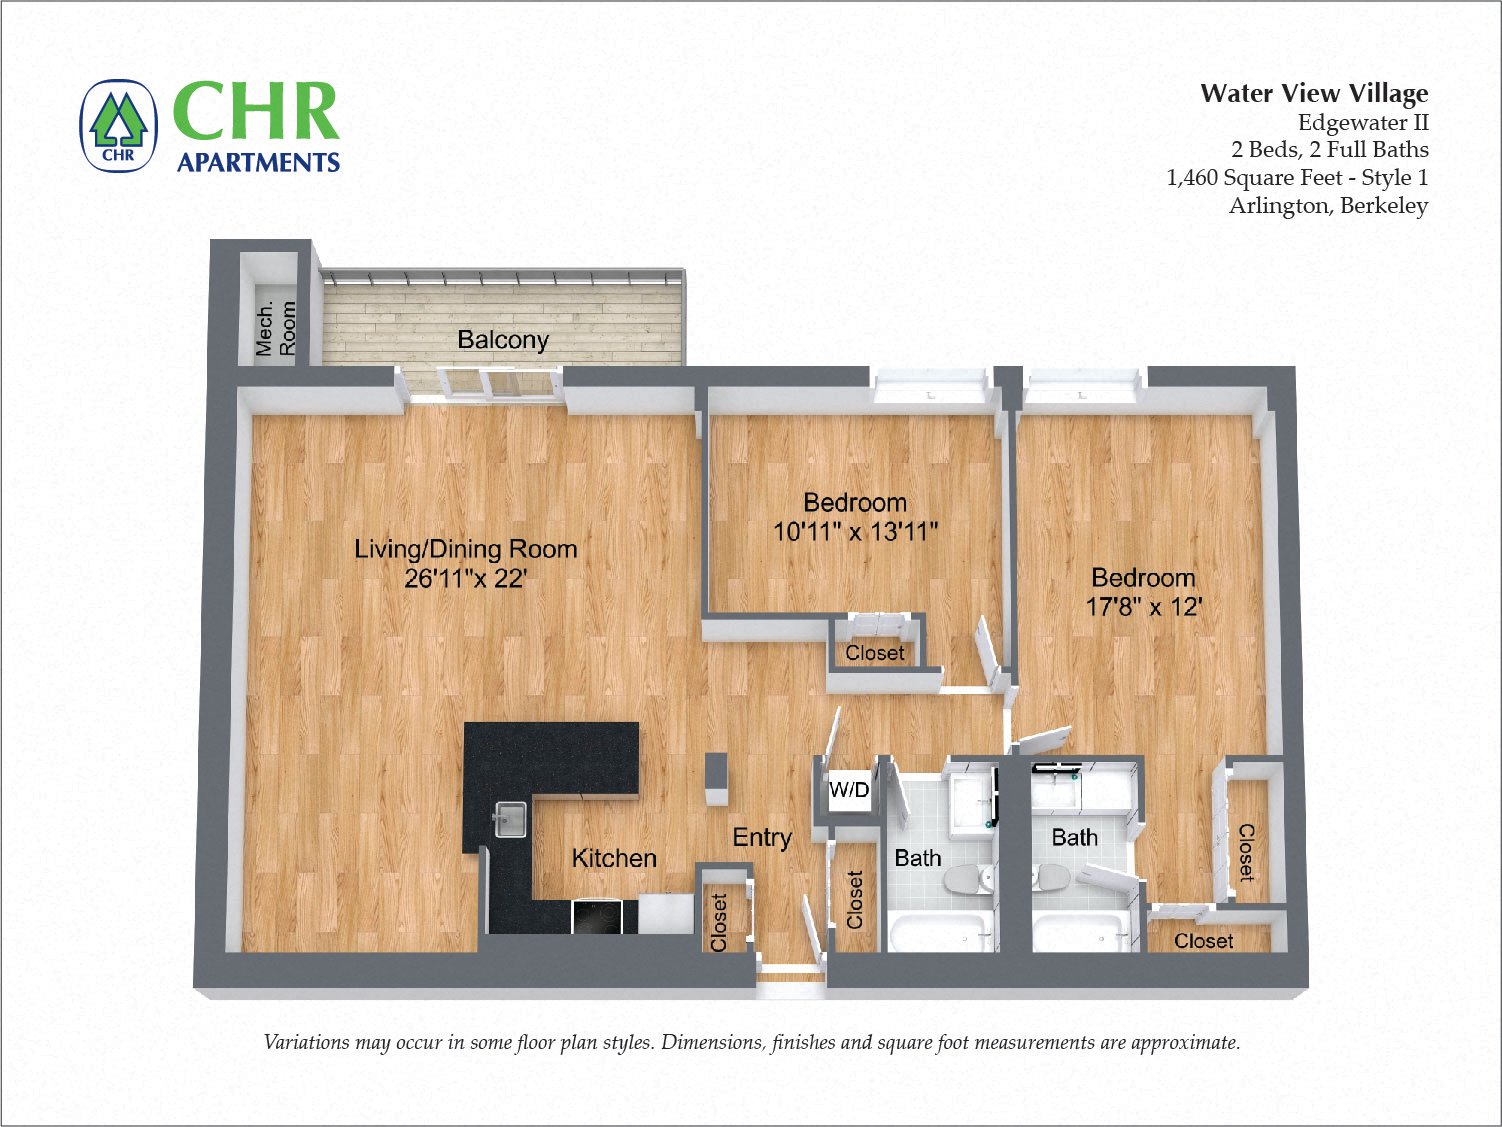 Floor plan 2 Bed/2 Bath Large with Balcony image 3